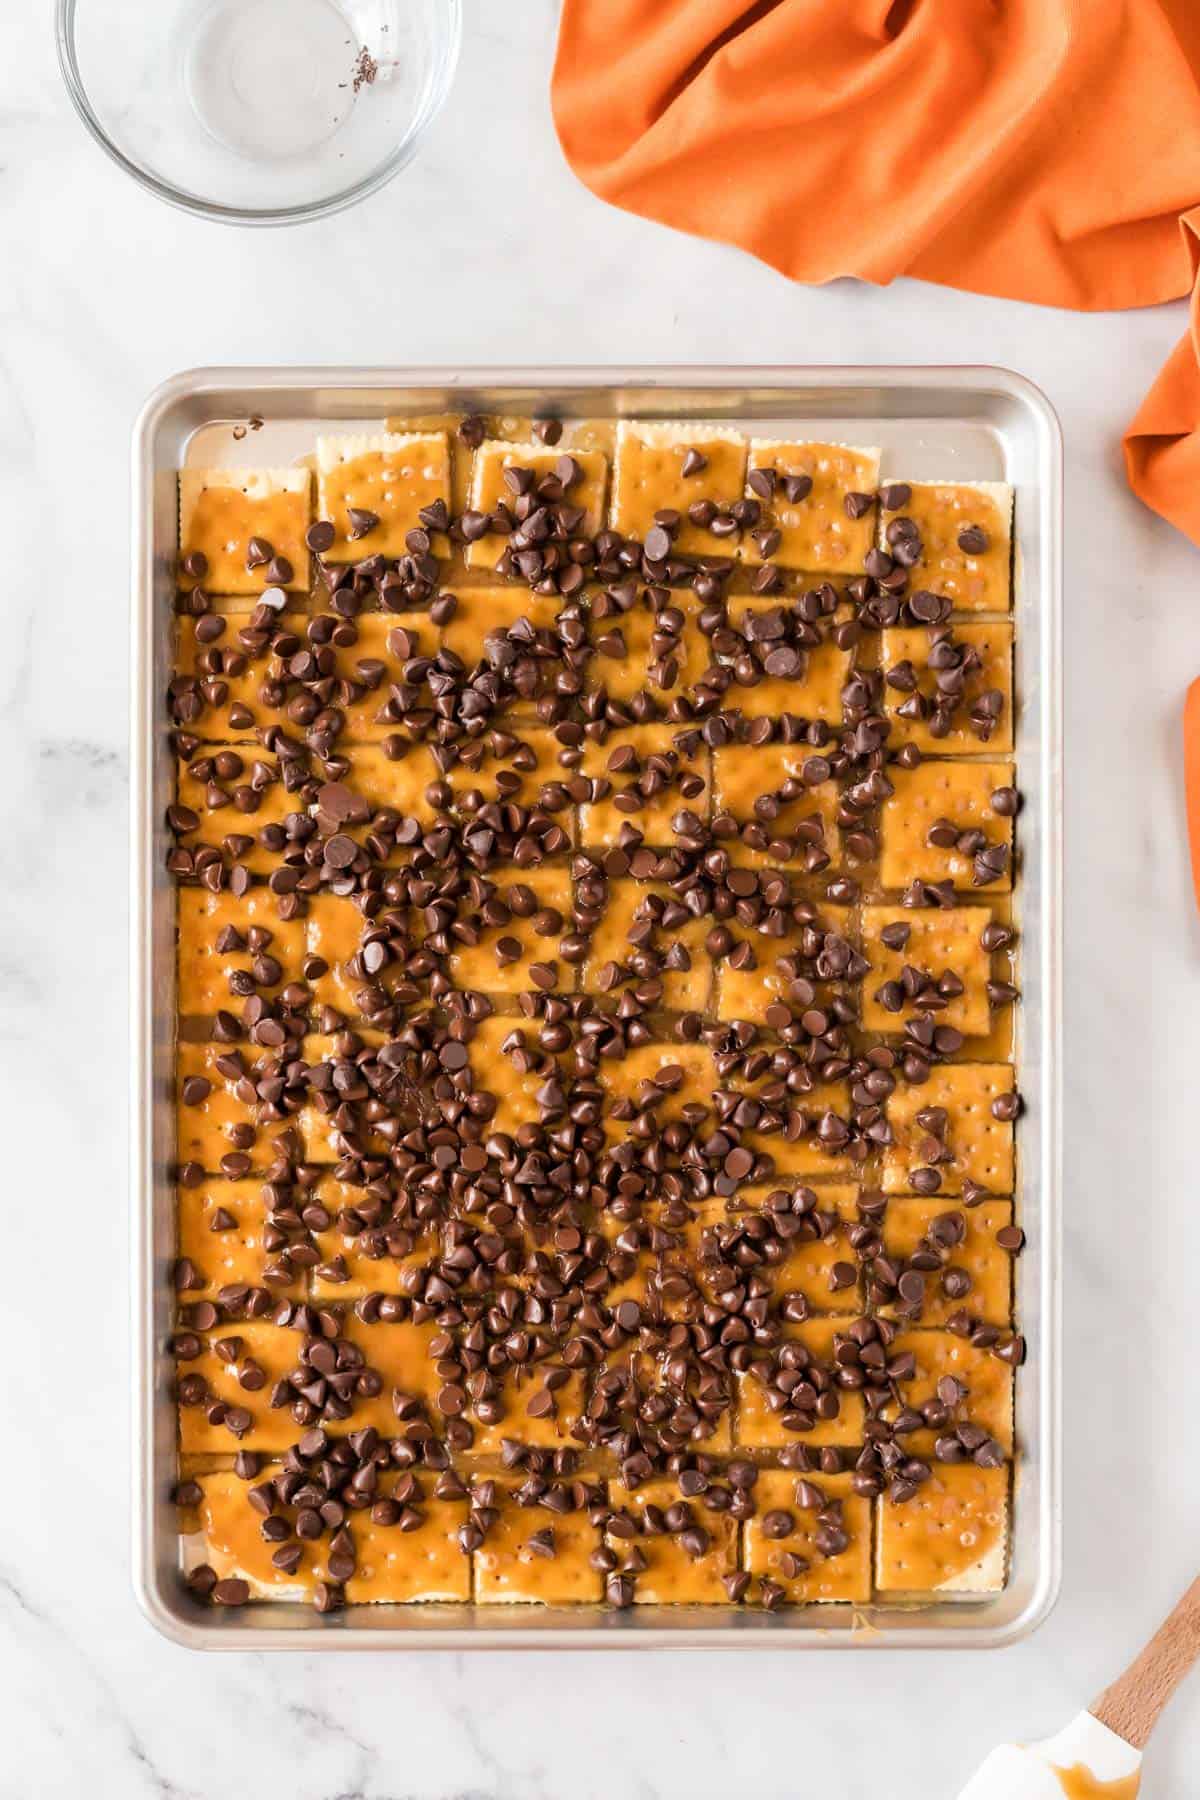 chocolate chips added to the halloween crack